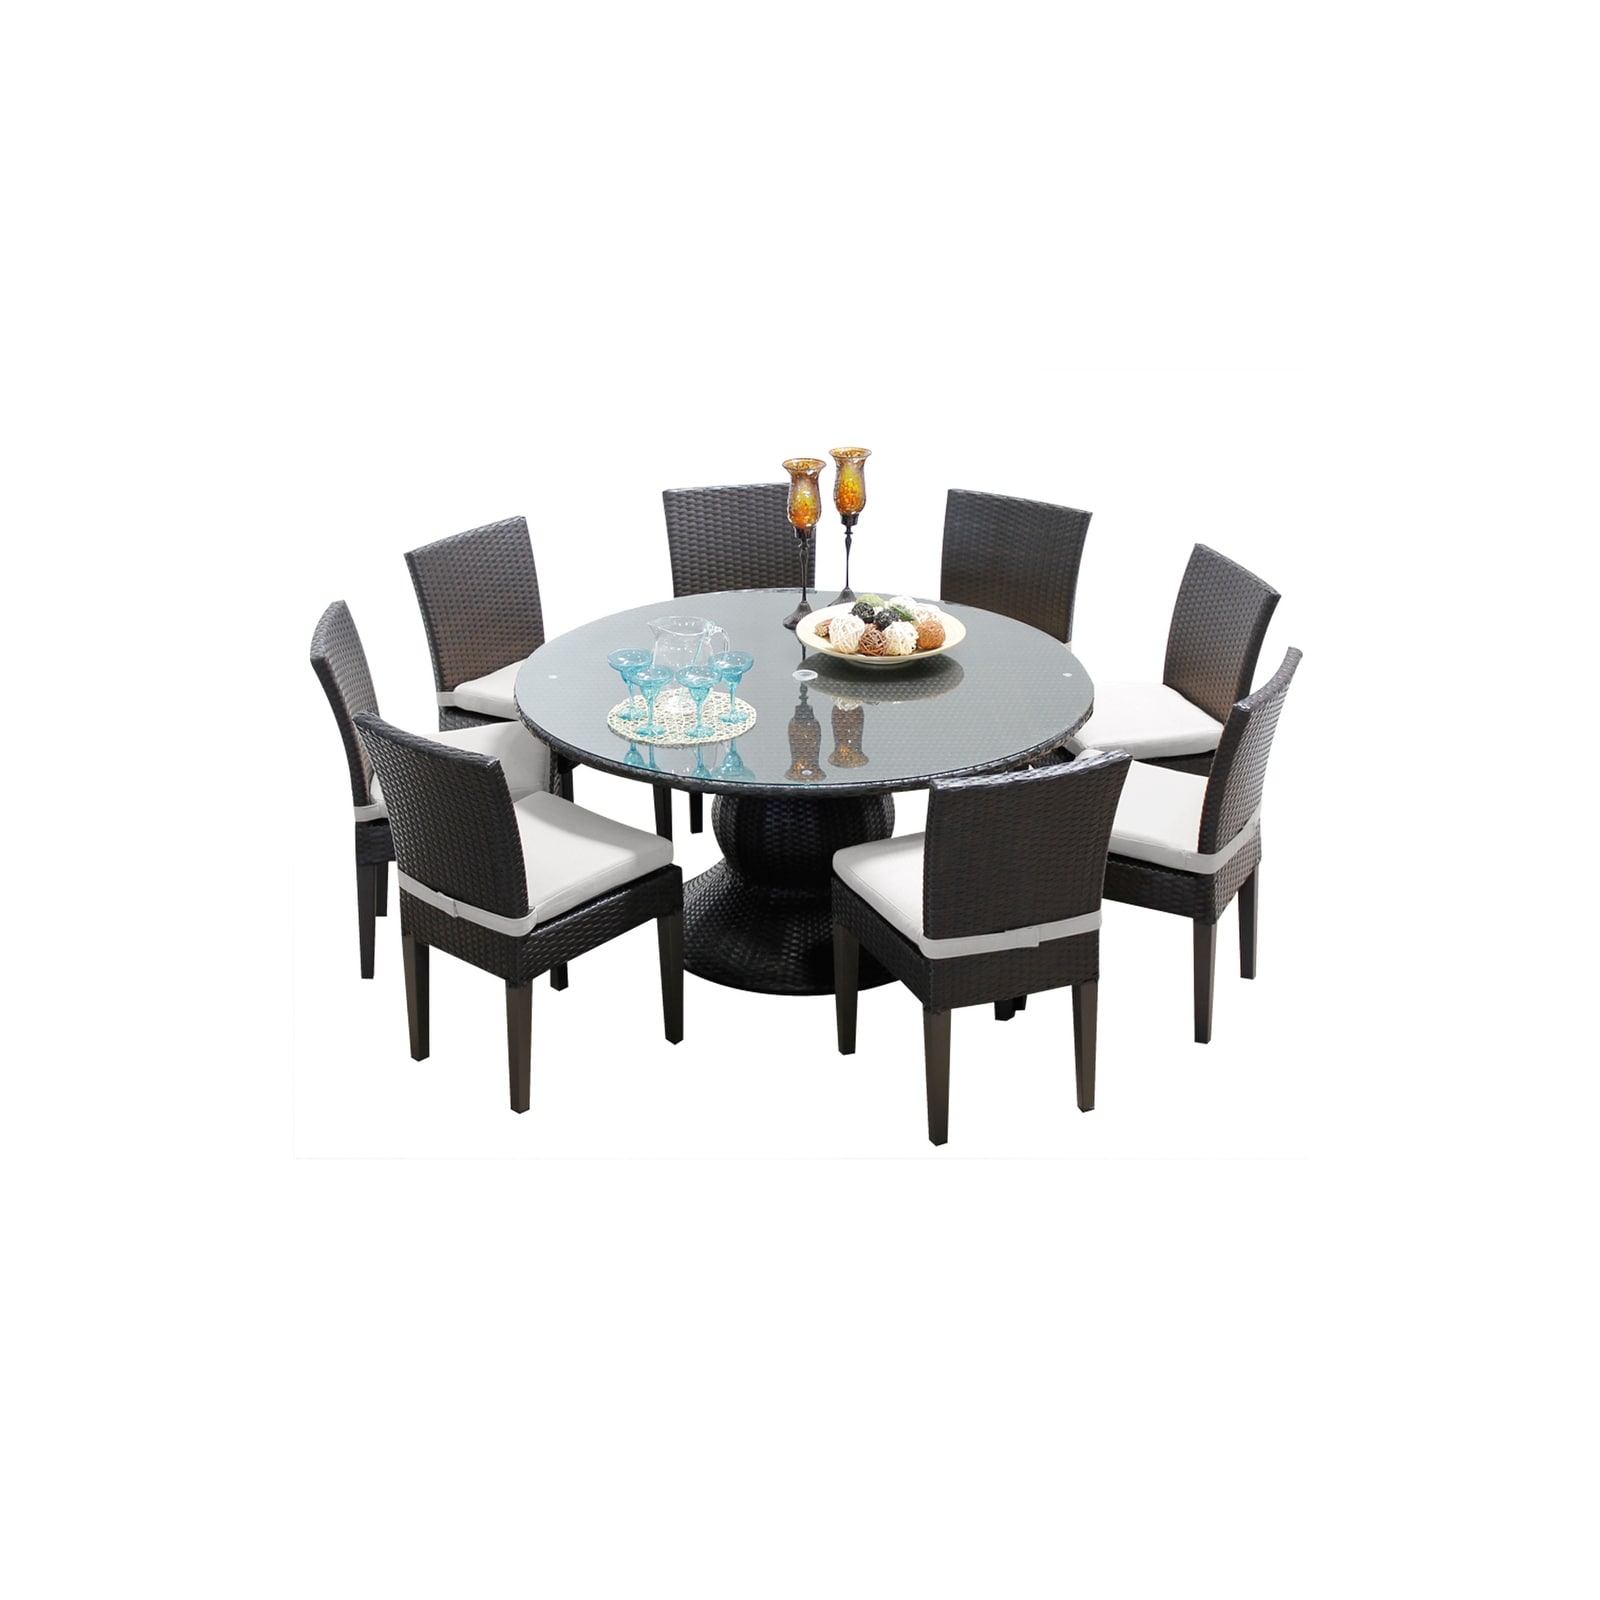 Napa 9 Piece Round Outdoor Patio Wicker Dining Set With Cushions